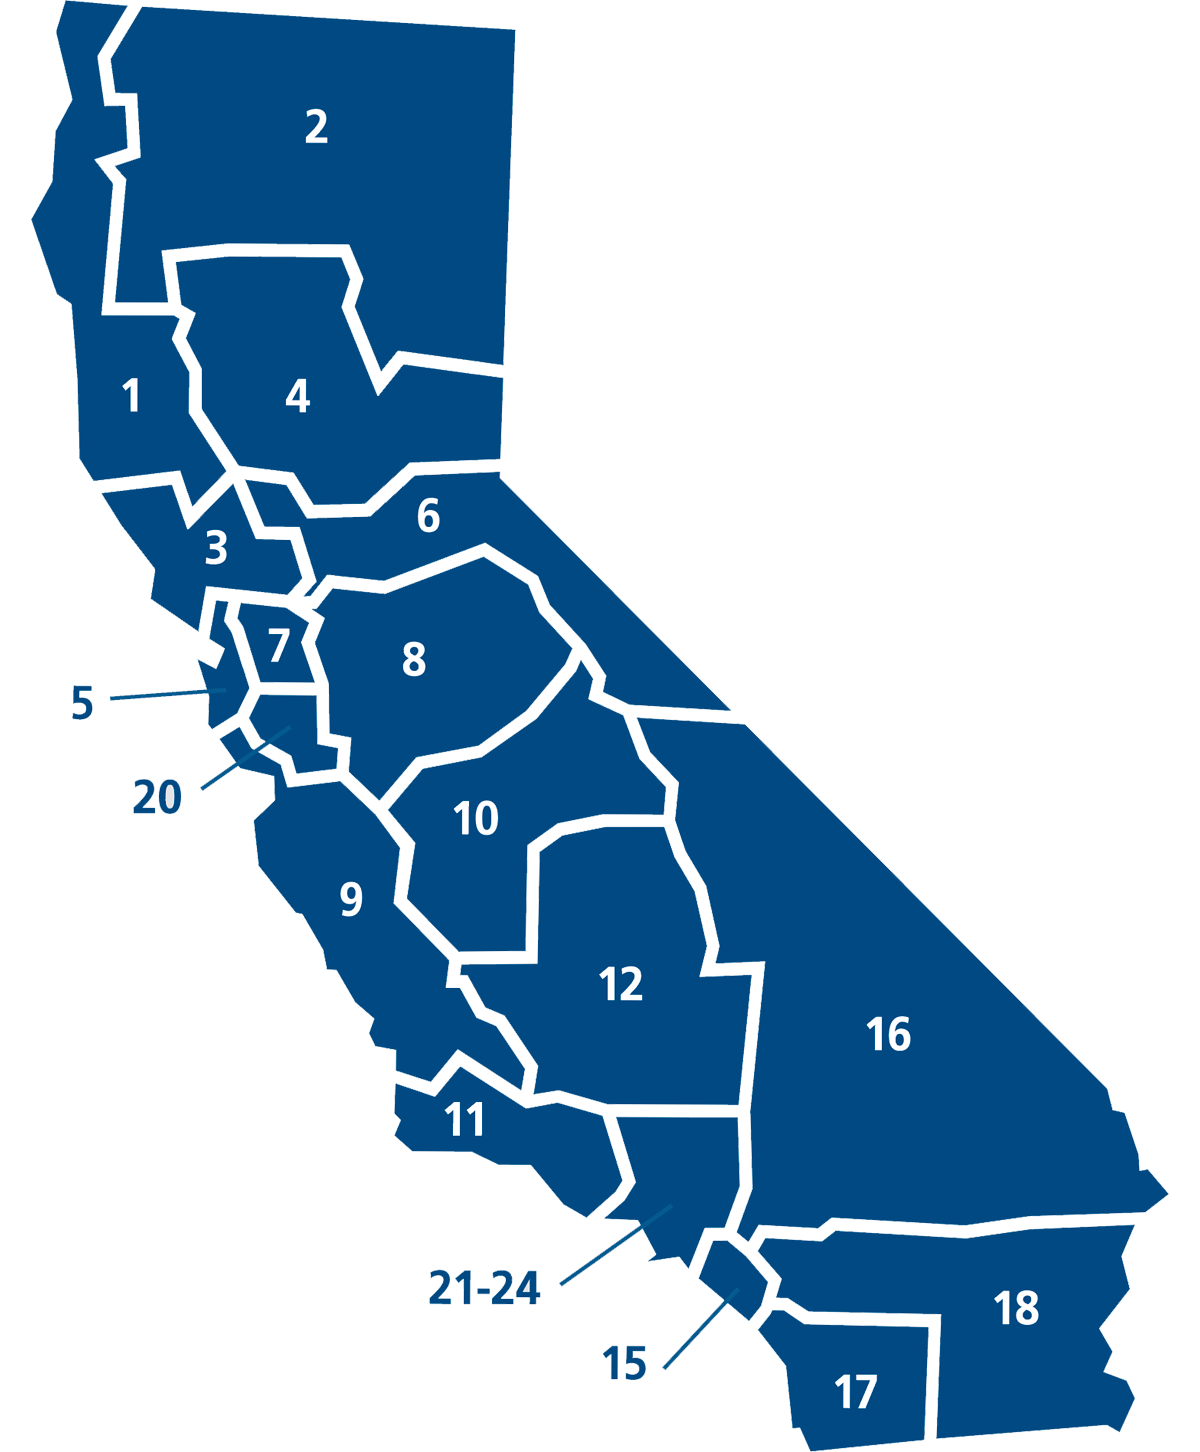 a simple map of California broken into number labeled districts